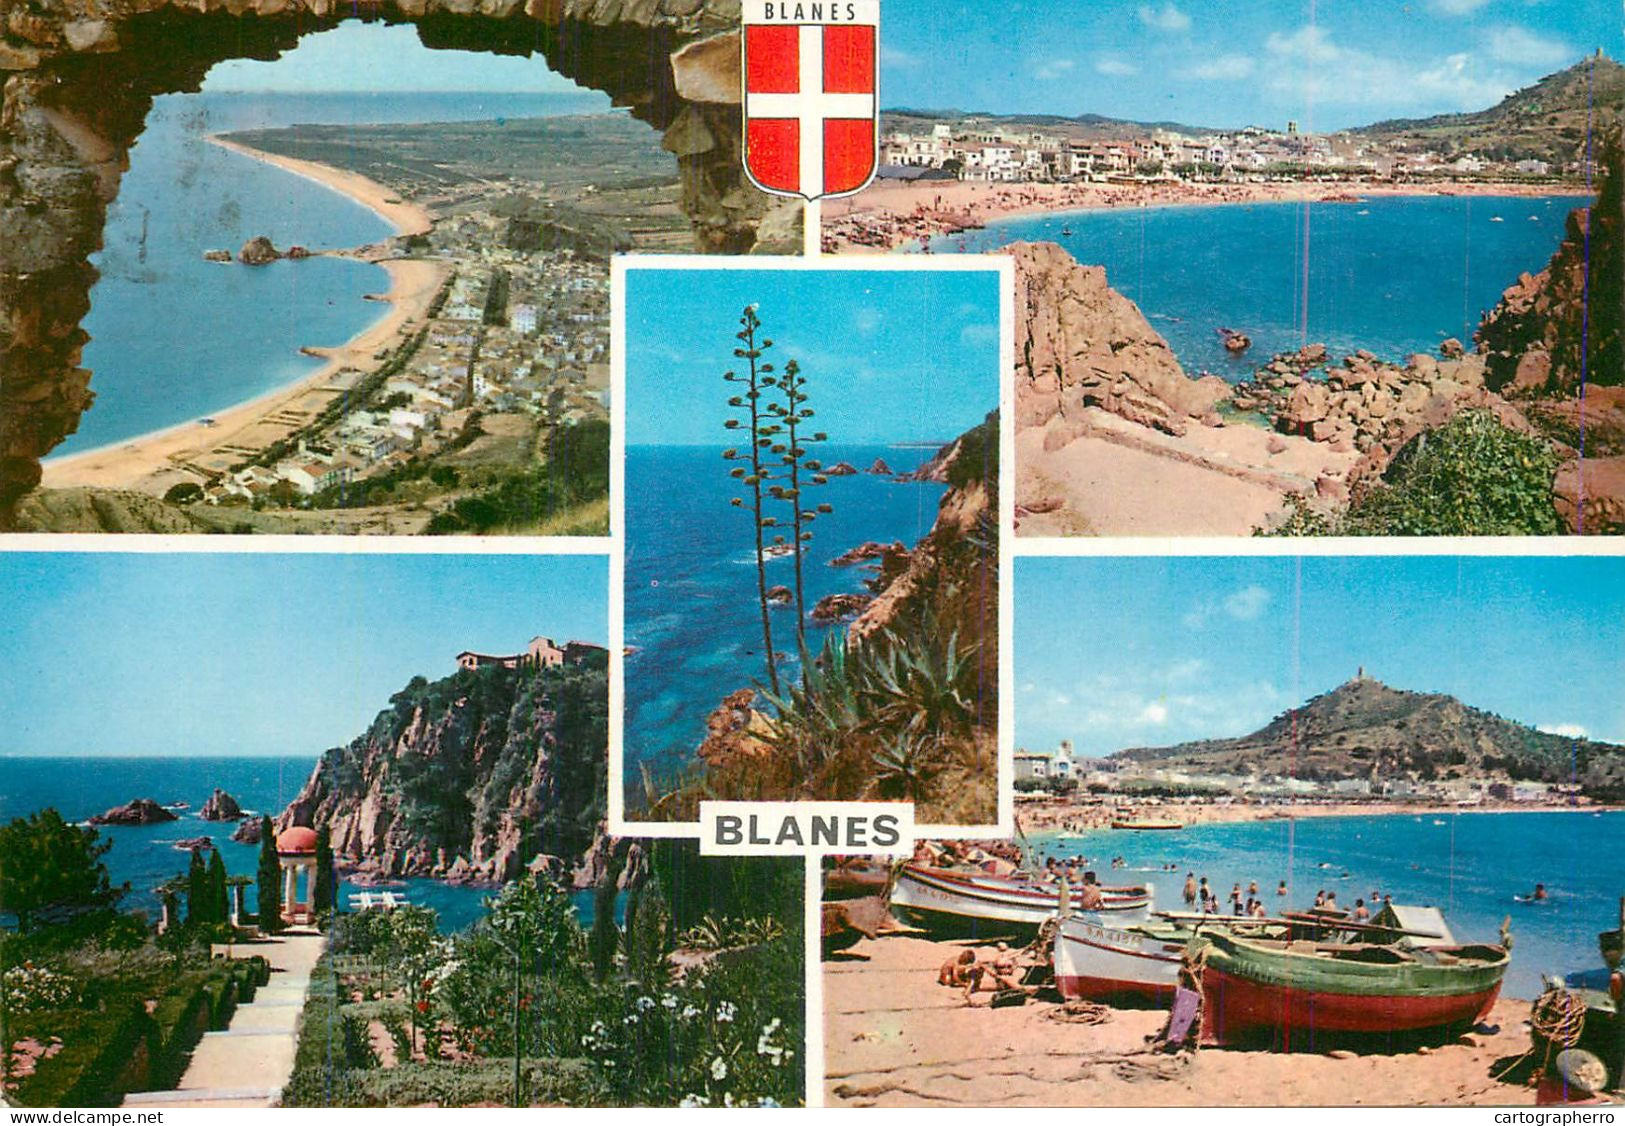 Navigation Sailing Vessels & Boats Themed Postcard Blanes Beach Lifeboat - Voiliers